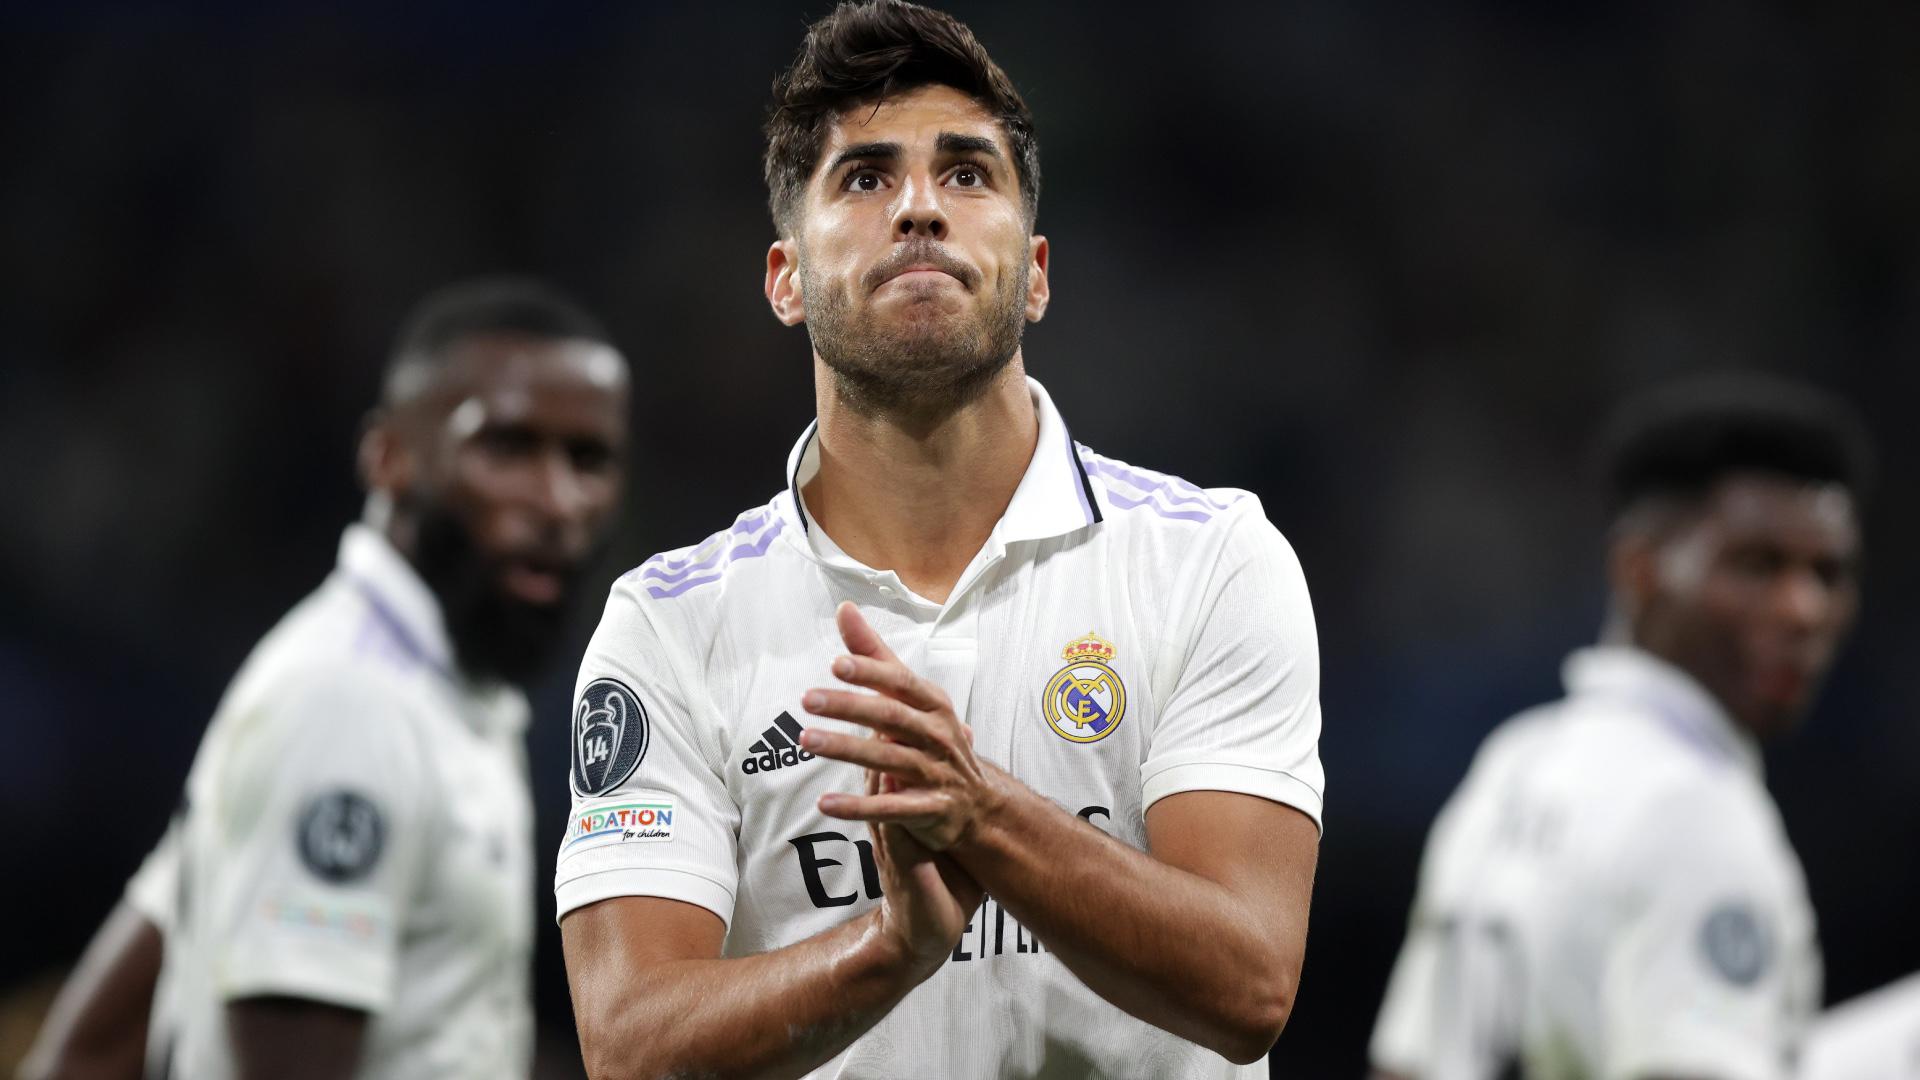 Asensio has been contacted by Barcelona through his representative Jorge Mendes.